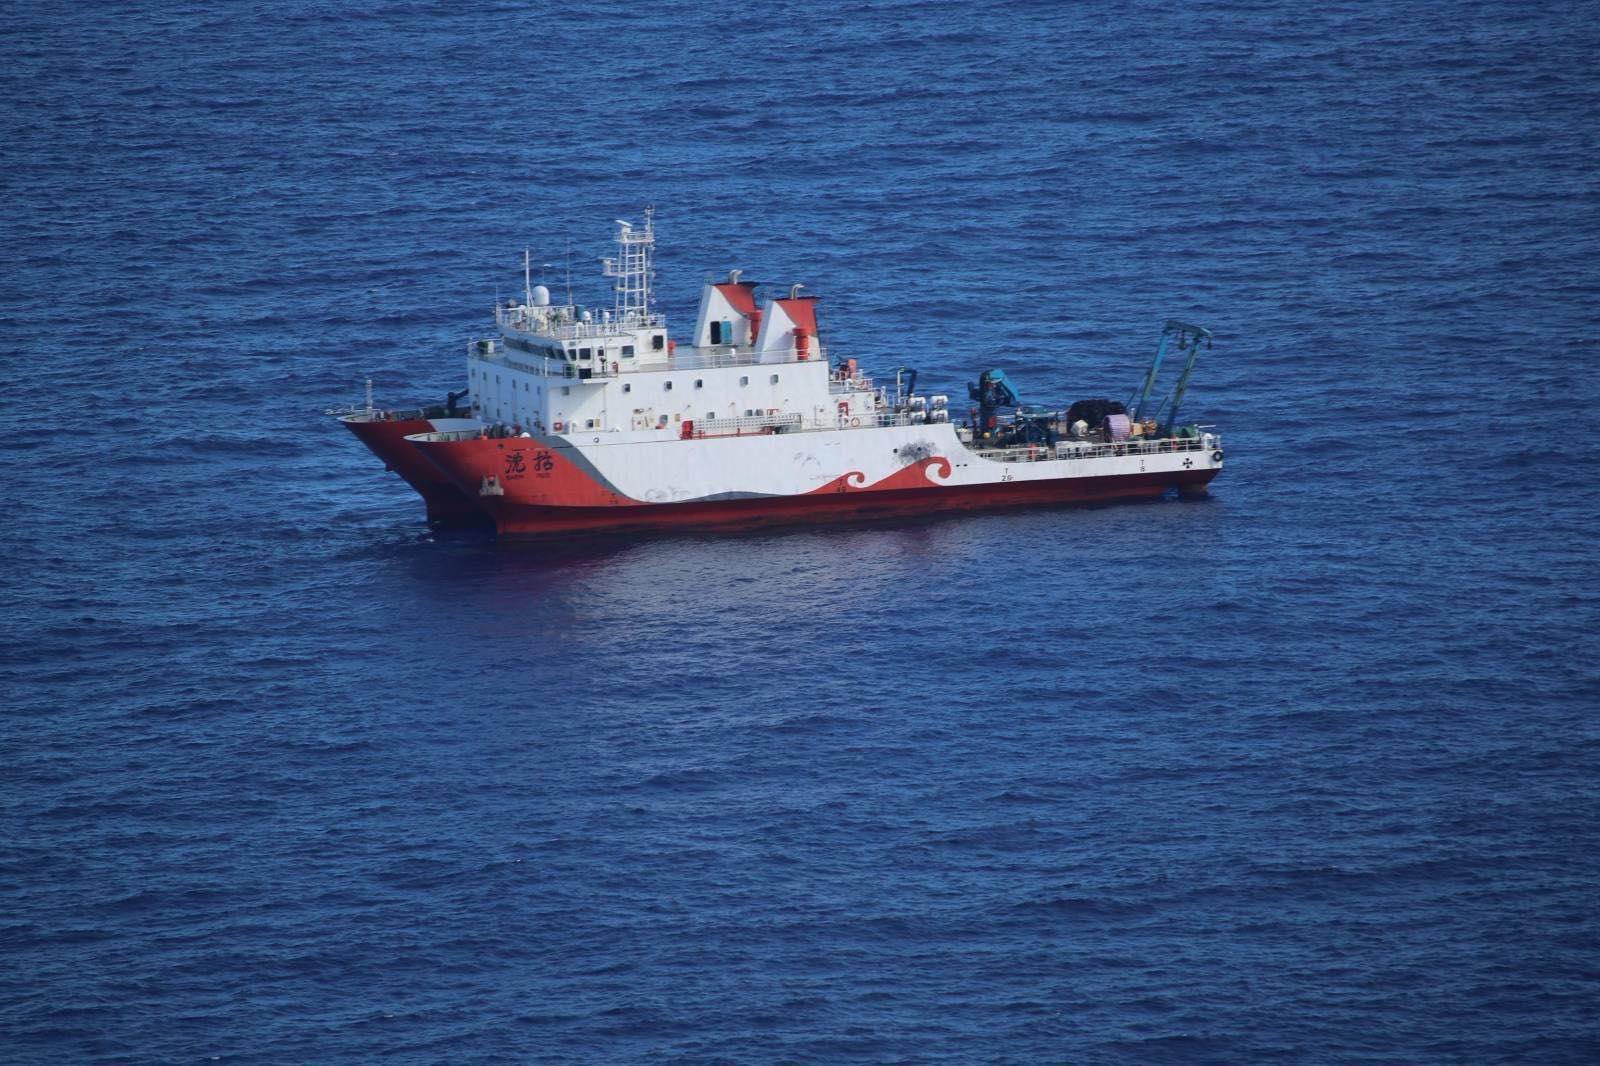 Chinese-flagged research vessel, "SHEN KUO," loitering in the vicinity northeast of Viga, Catanduanes as spotted by NOMAD N-22 aircraft. 